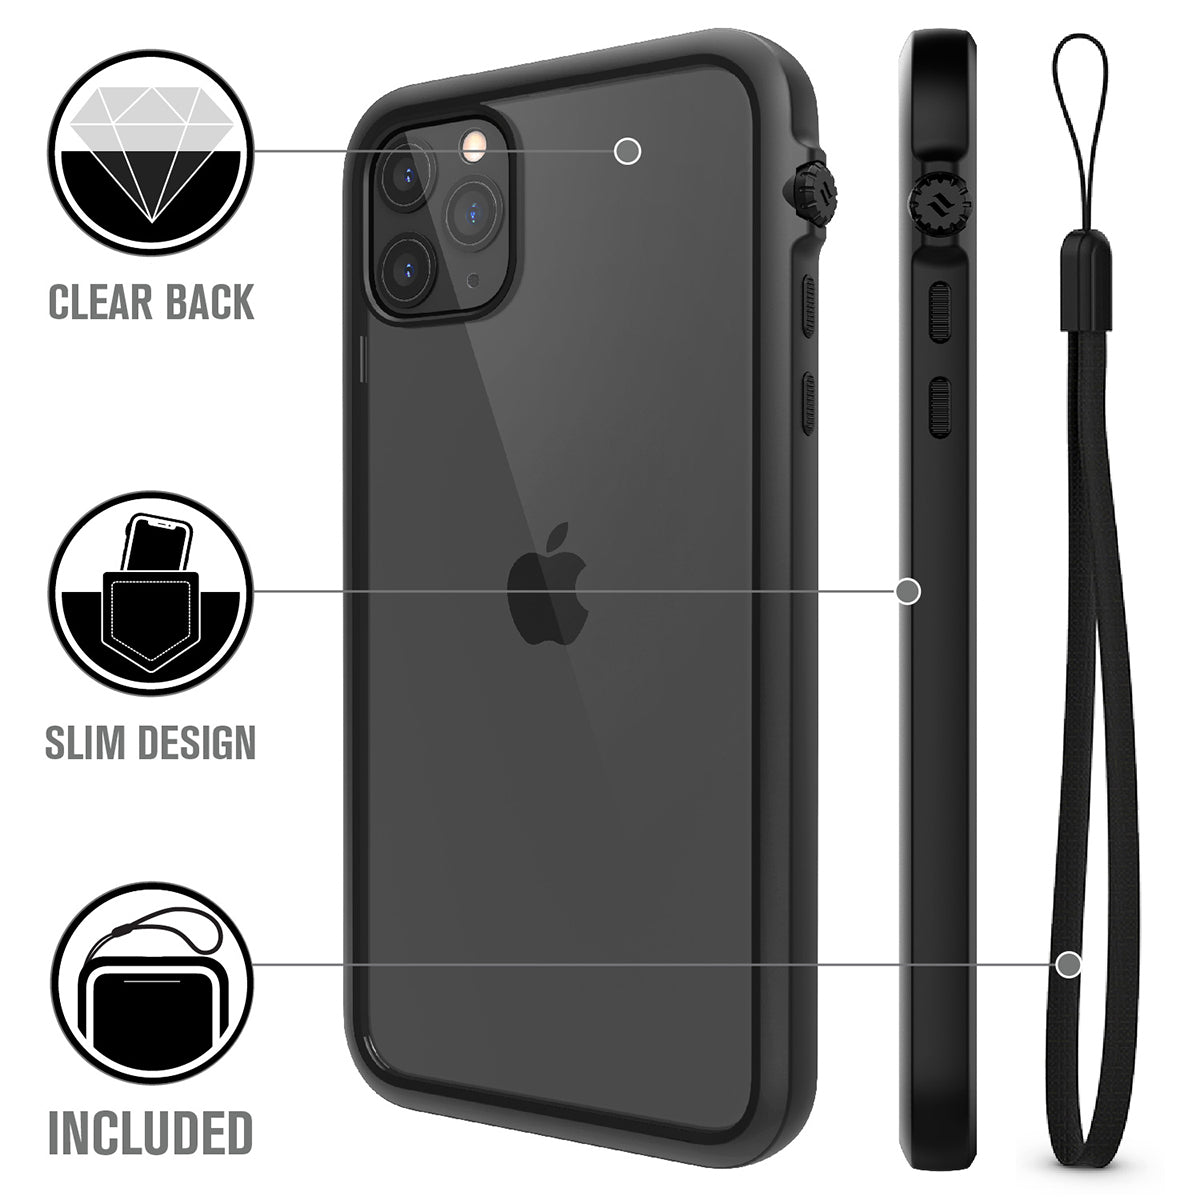 catalyst iPhone 11 series impact protection case stealth black showing the back view and buttons of the case for iPhone 11 pro max and a lanyard text reads clear back slim design included